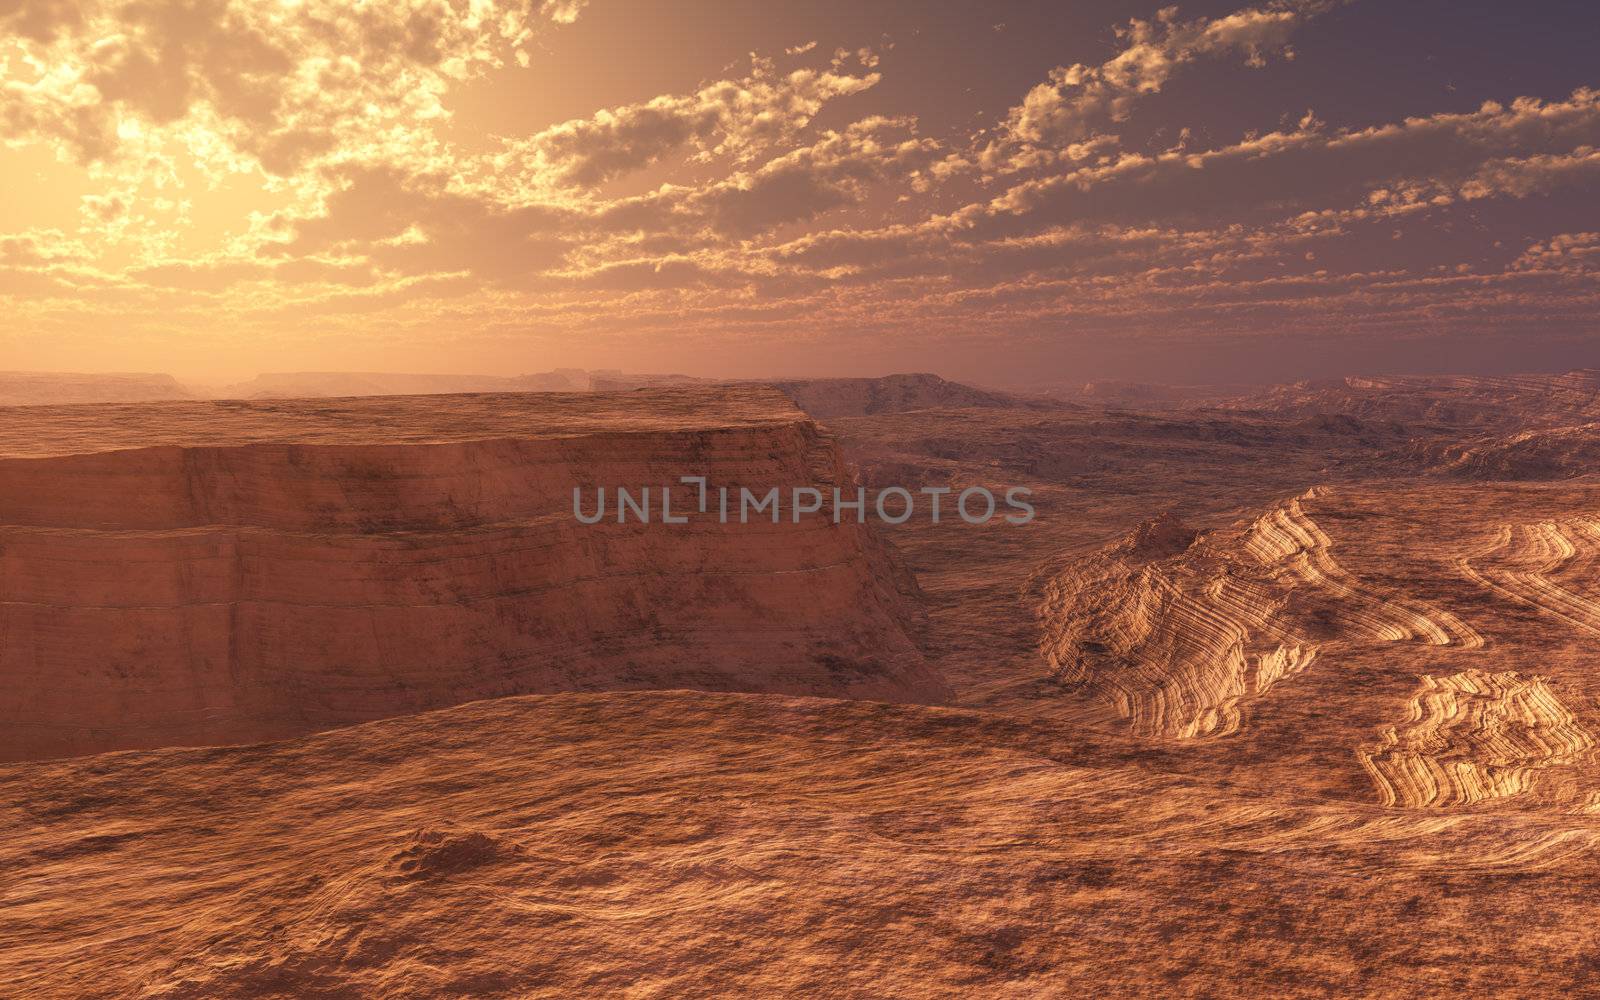 This image shows a dry canyon with sunset